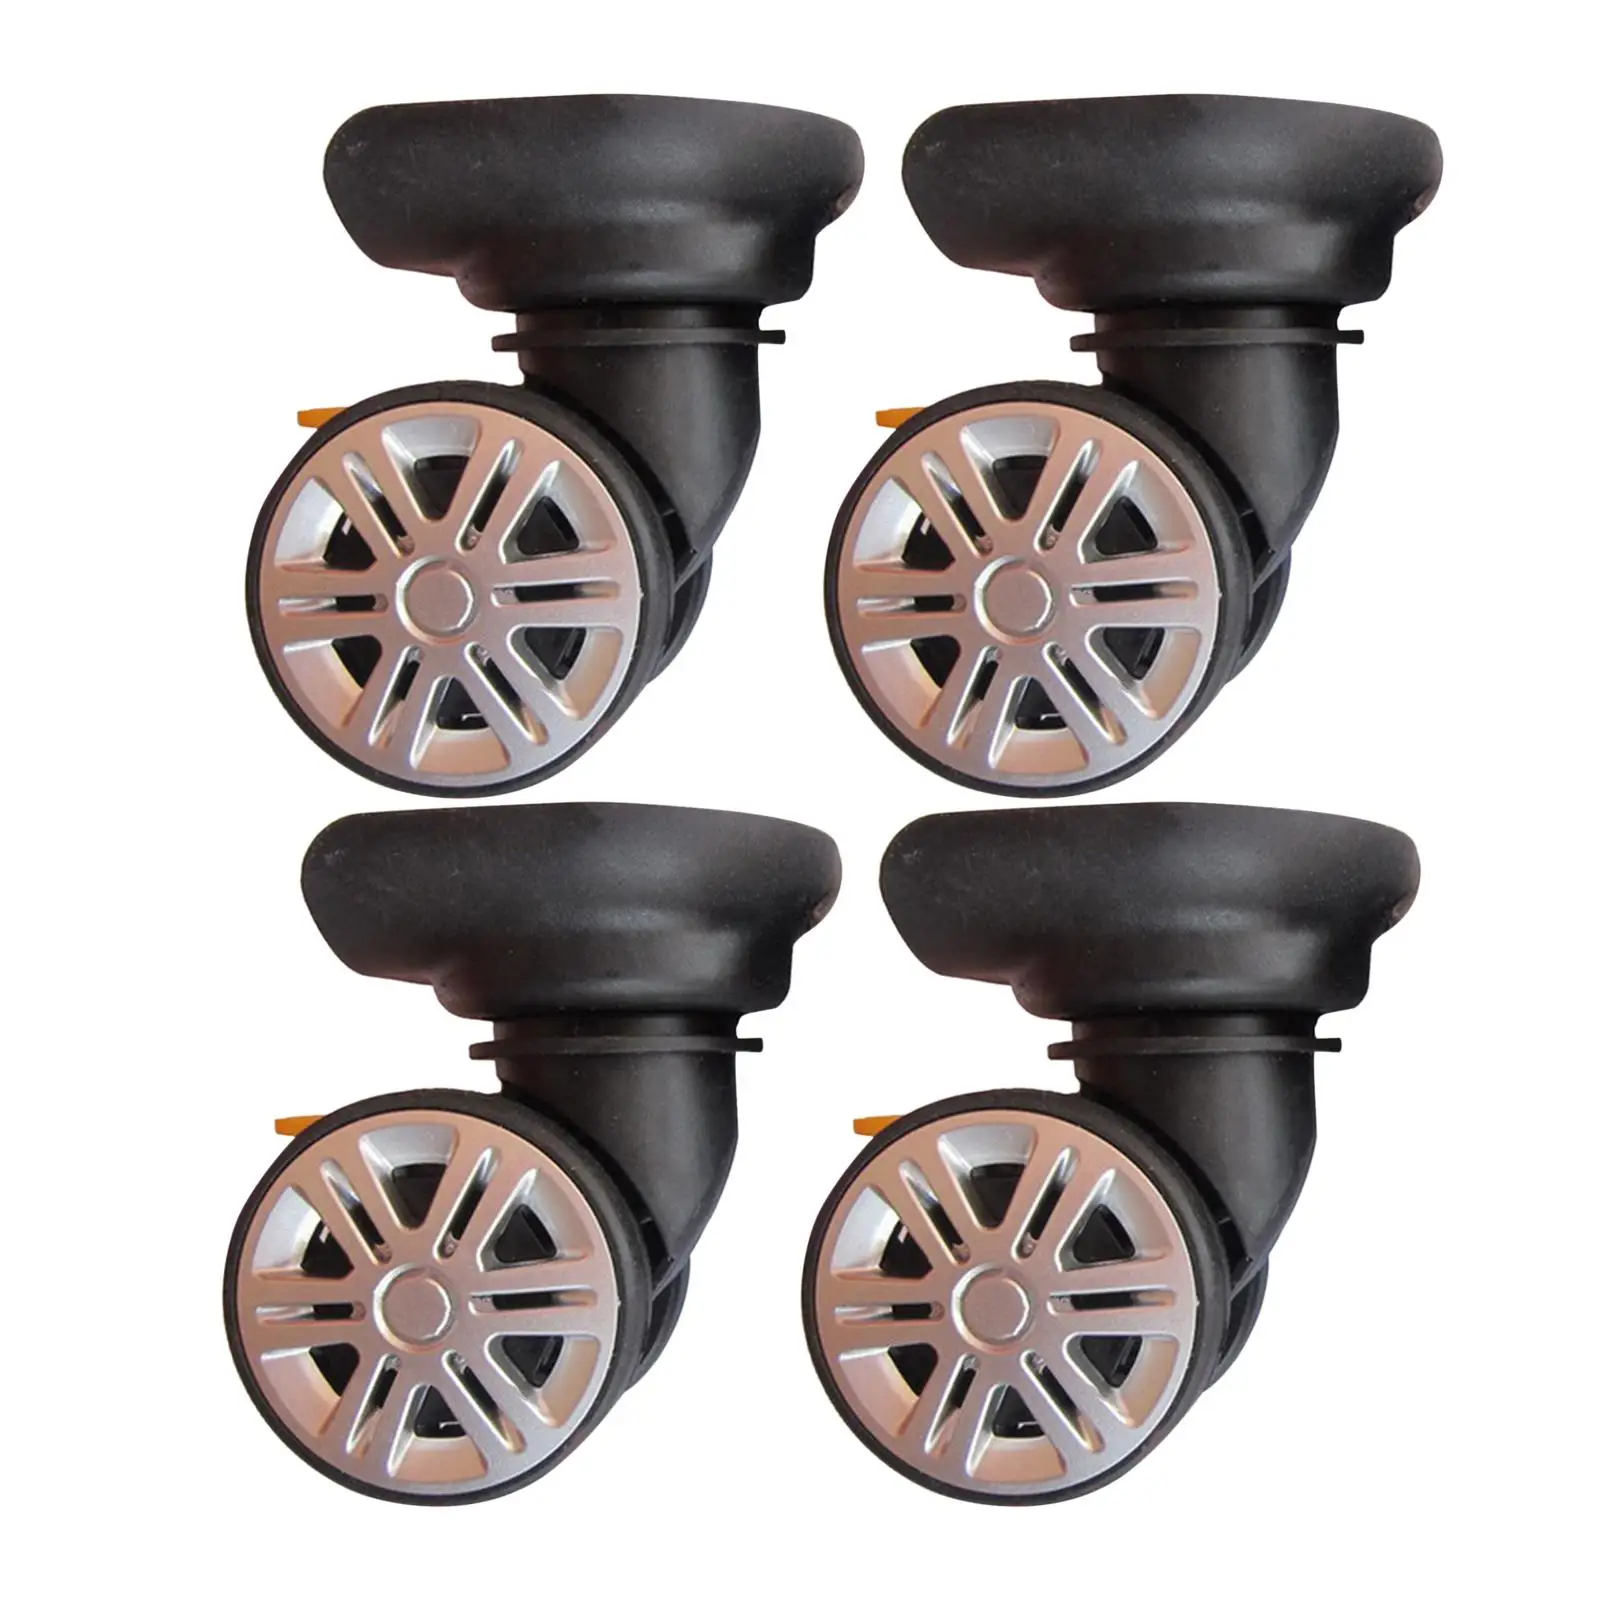 4Pcs Luggage Suitcase Wheels Luggage Accessories Trolley Case Wheels for Luggage Travelling Case Shopping Carts Trolley Case